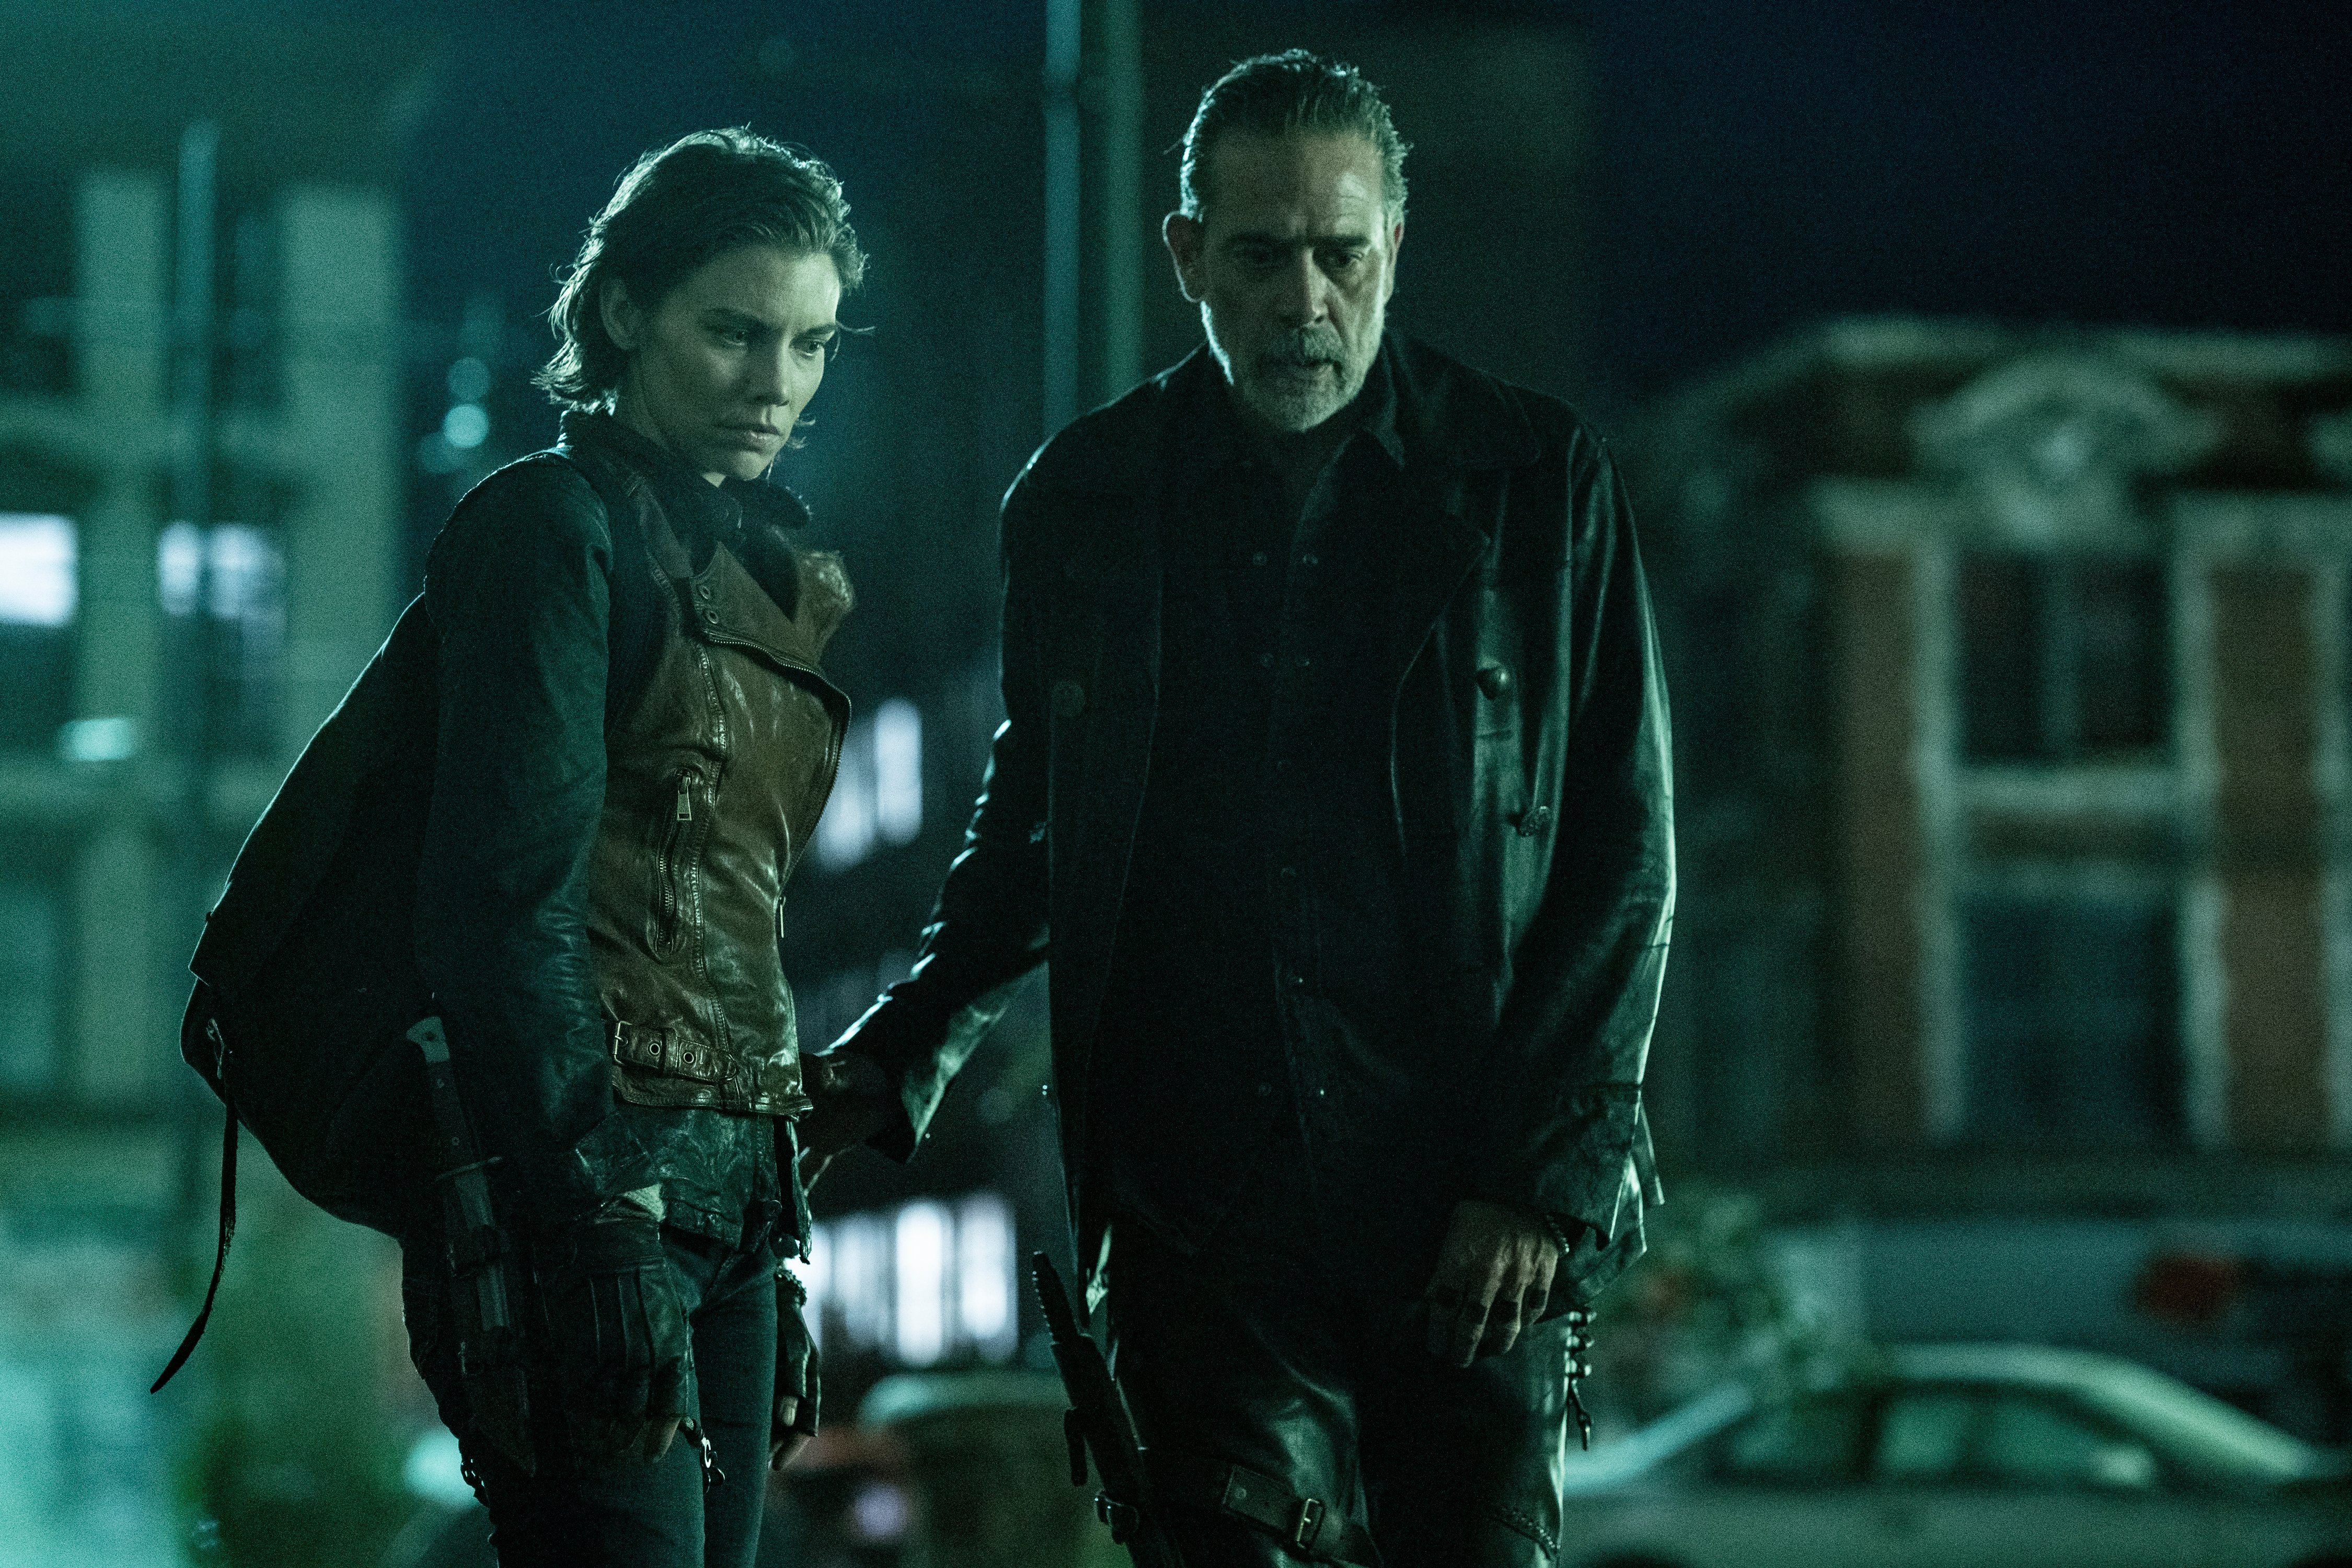 Lauren Cohan as Maggie and Jeffrey Dean Morgan as Negan in a scene from AMC's 'The Walking Dead: Dead City.' They are both looking down at something on the ground and are visible from the thighs up. Maggie (left) is a white woman with chin-length brown hair, and she's wearing a long-sleeved, black shirt underneath a brown, leather vest and black pants and fingerless gloves. She has a black backpack over her shoulder. Negan (right) is a tall, white man with slicked-back black hair with a receding hairline and a salt-and-pepper beard. He's wearing all black - a black leather jacket, a black button-down. 